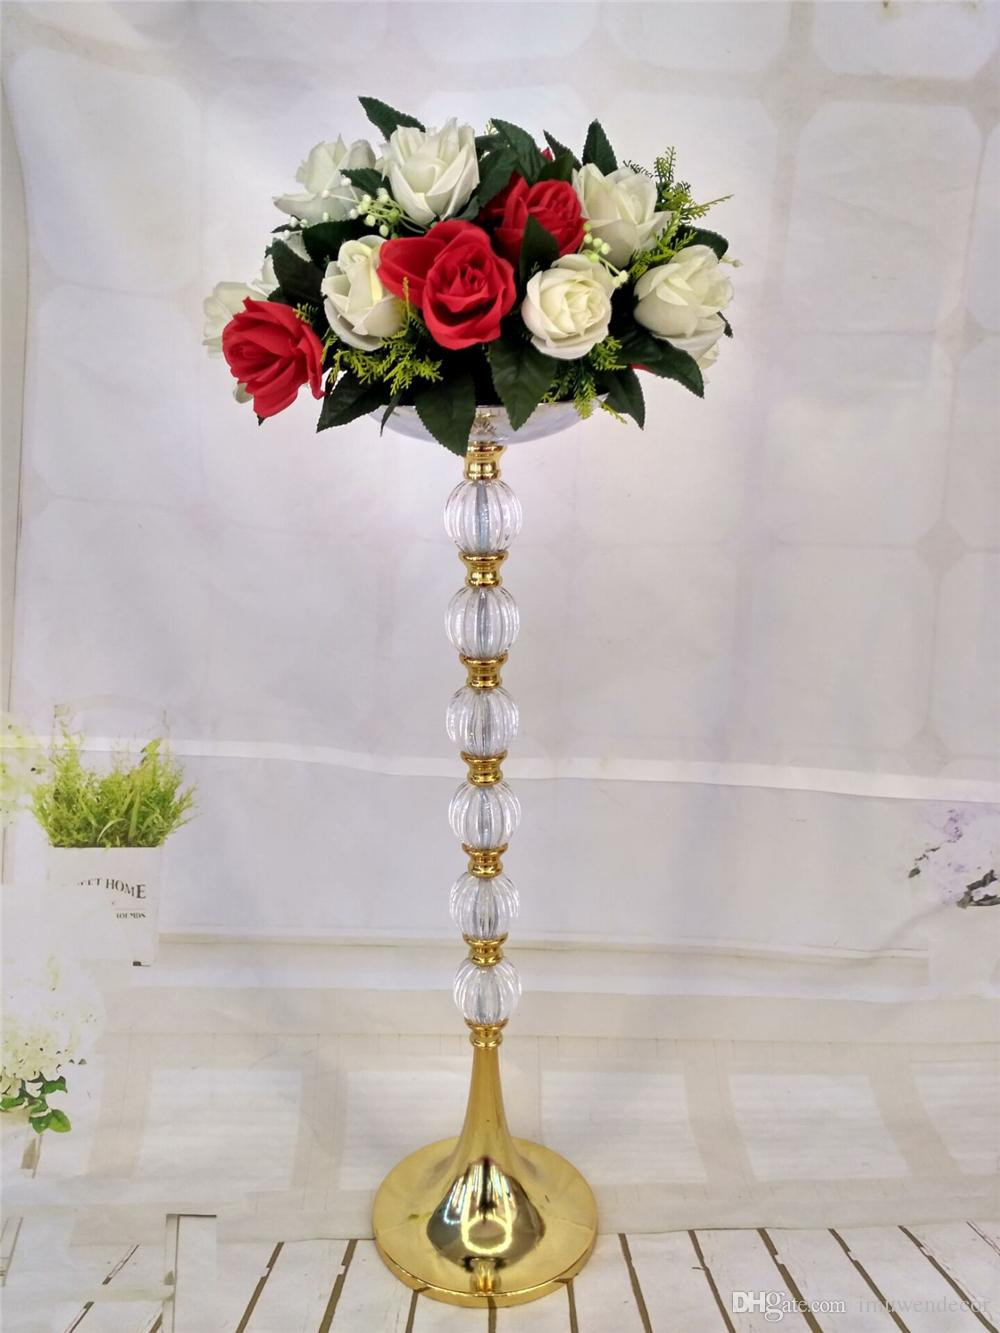 11 Ideal Used Wedding Centerpiece Vases for Sale 2022 free download used wedding centerpiece vases for sale of party vases www topsimages com within metal vases tall acrylic table vase wedding centerpiece jpg 1000x1333 party vases